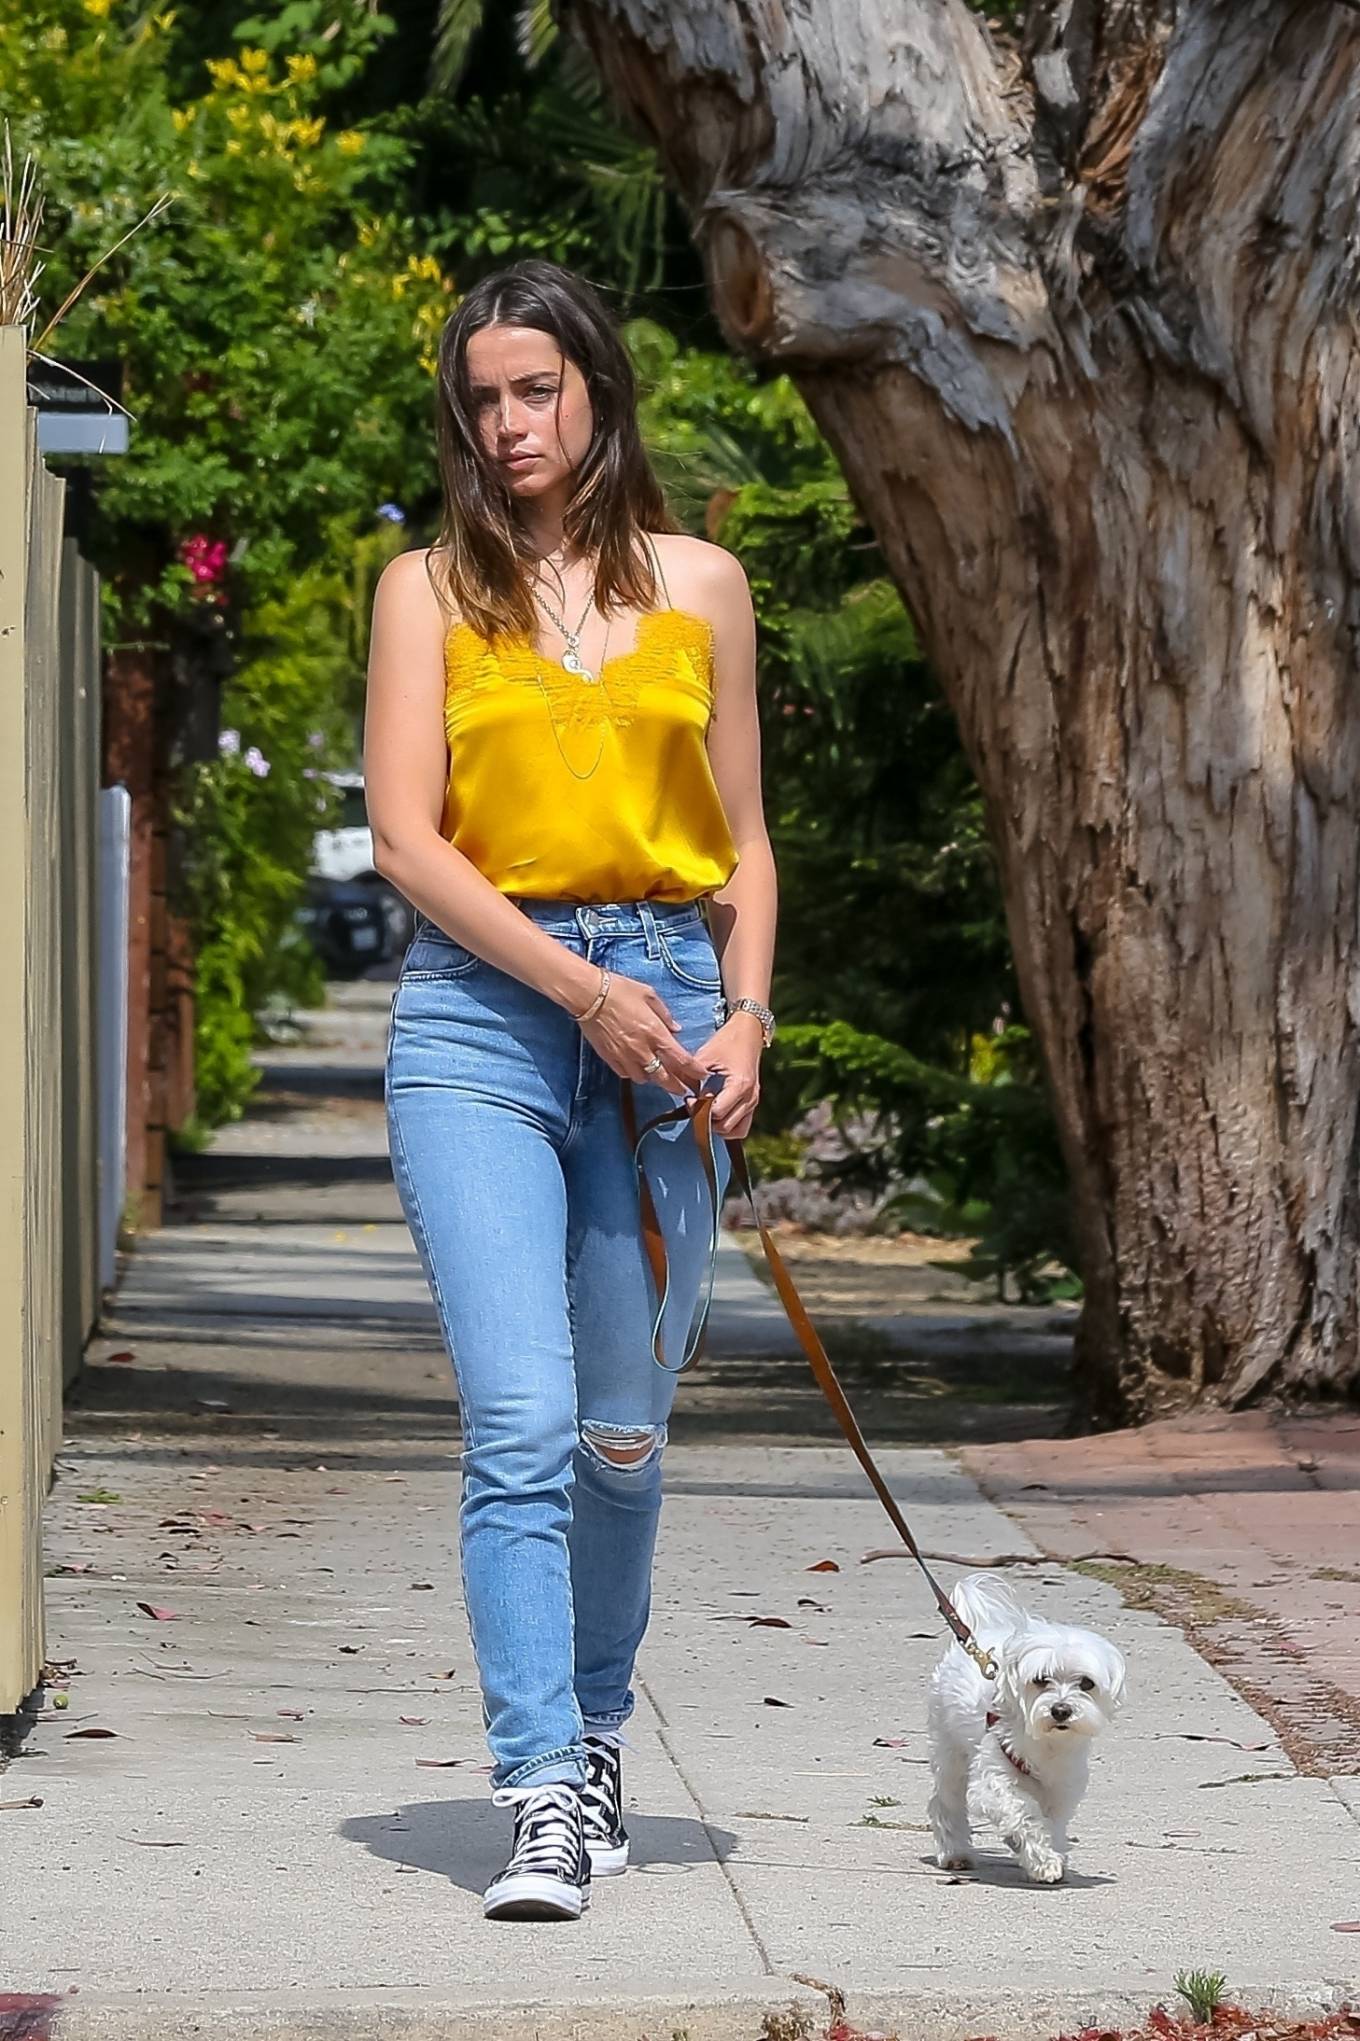 Ana De Armas in Yellow Top out with her dog in Venice-04 | GotCeleb